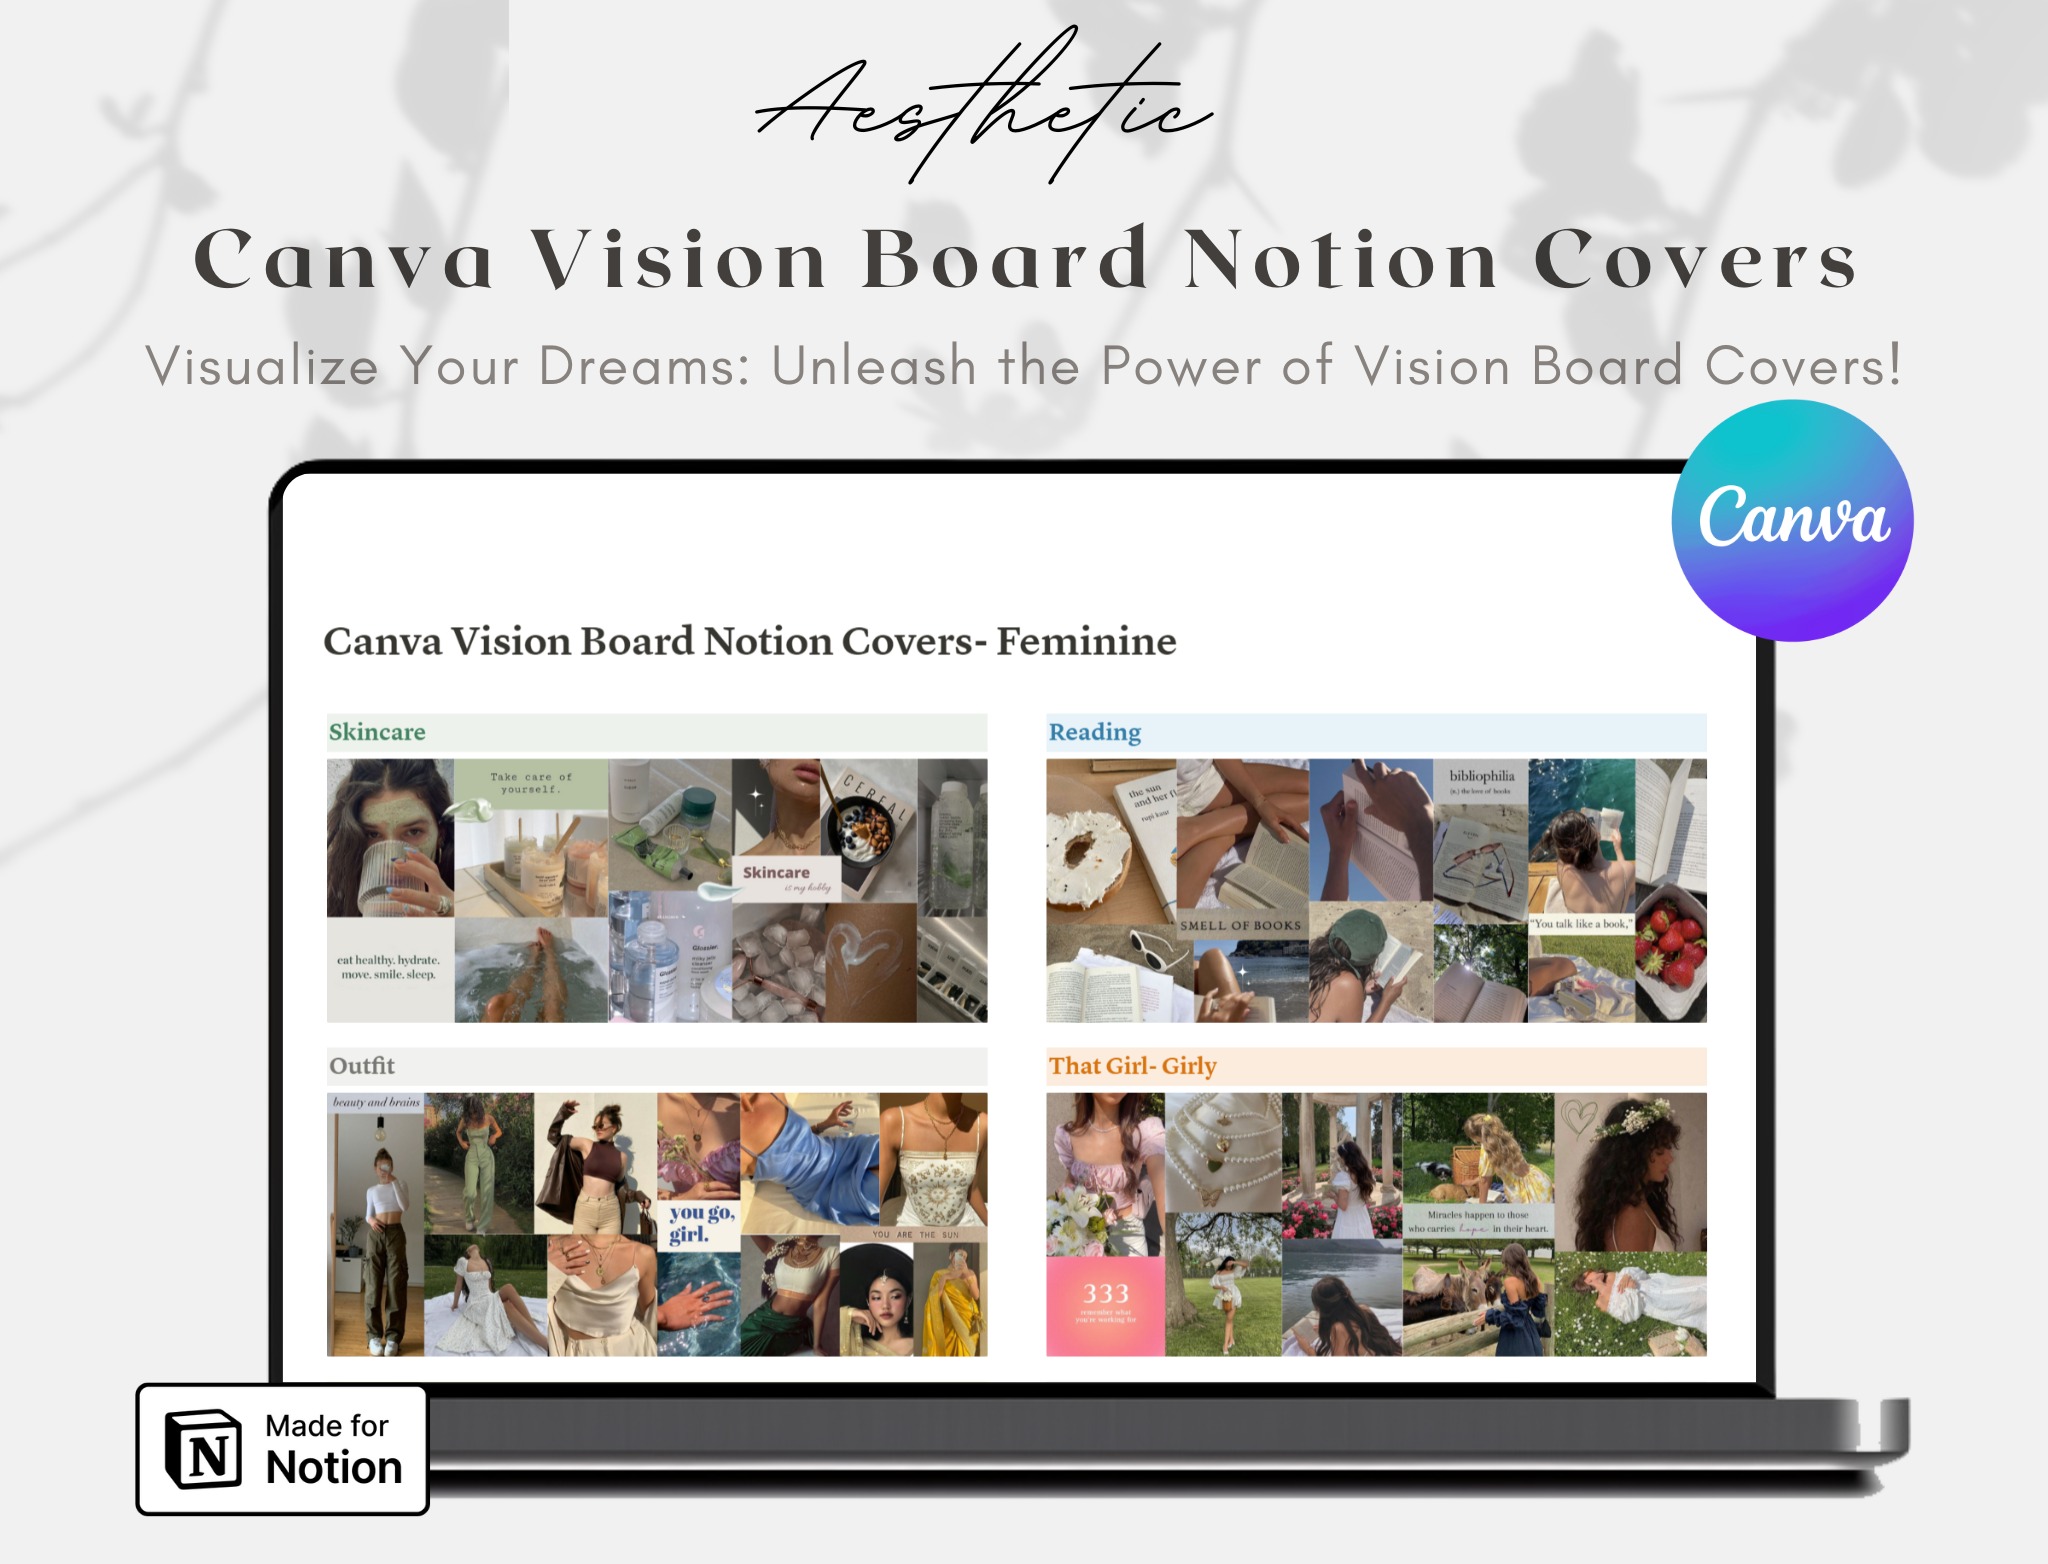 startuptile Canva Vision Board Notion Covers-Empower your dreams: vision board covers unleashed